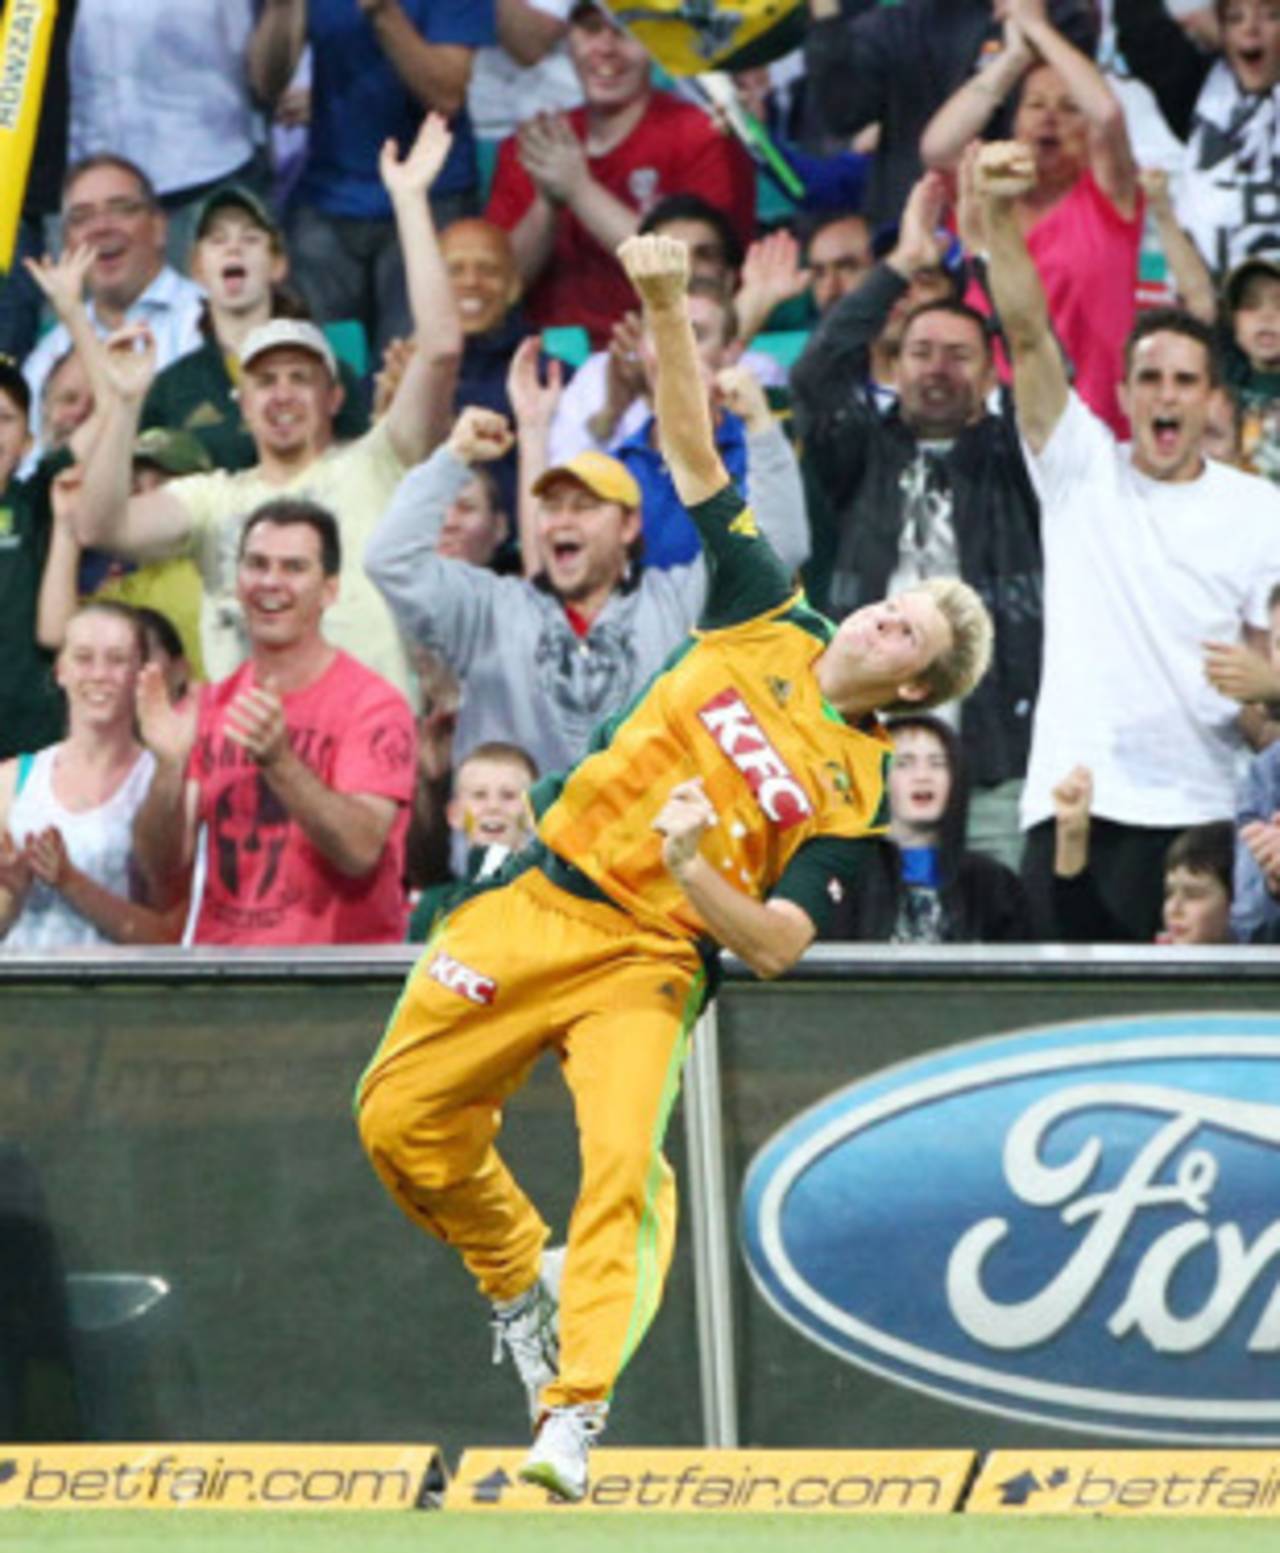 Steven Smith celebrates his stunning outfield catch of Travis Dowlin, Australia v West Indies, 2nd T20, Sydney, February 23, 2010